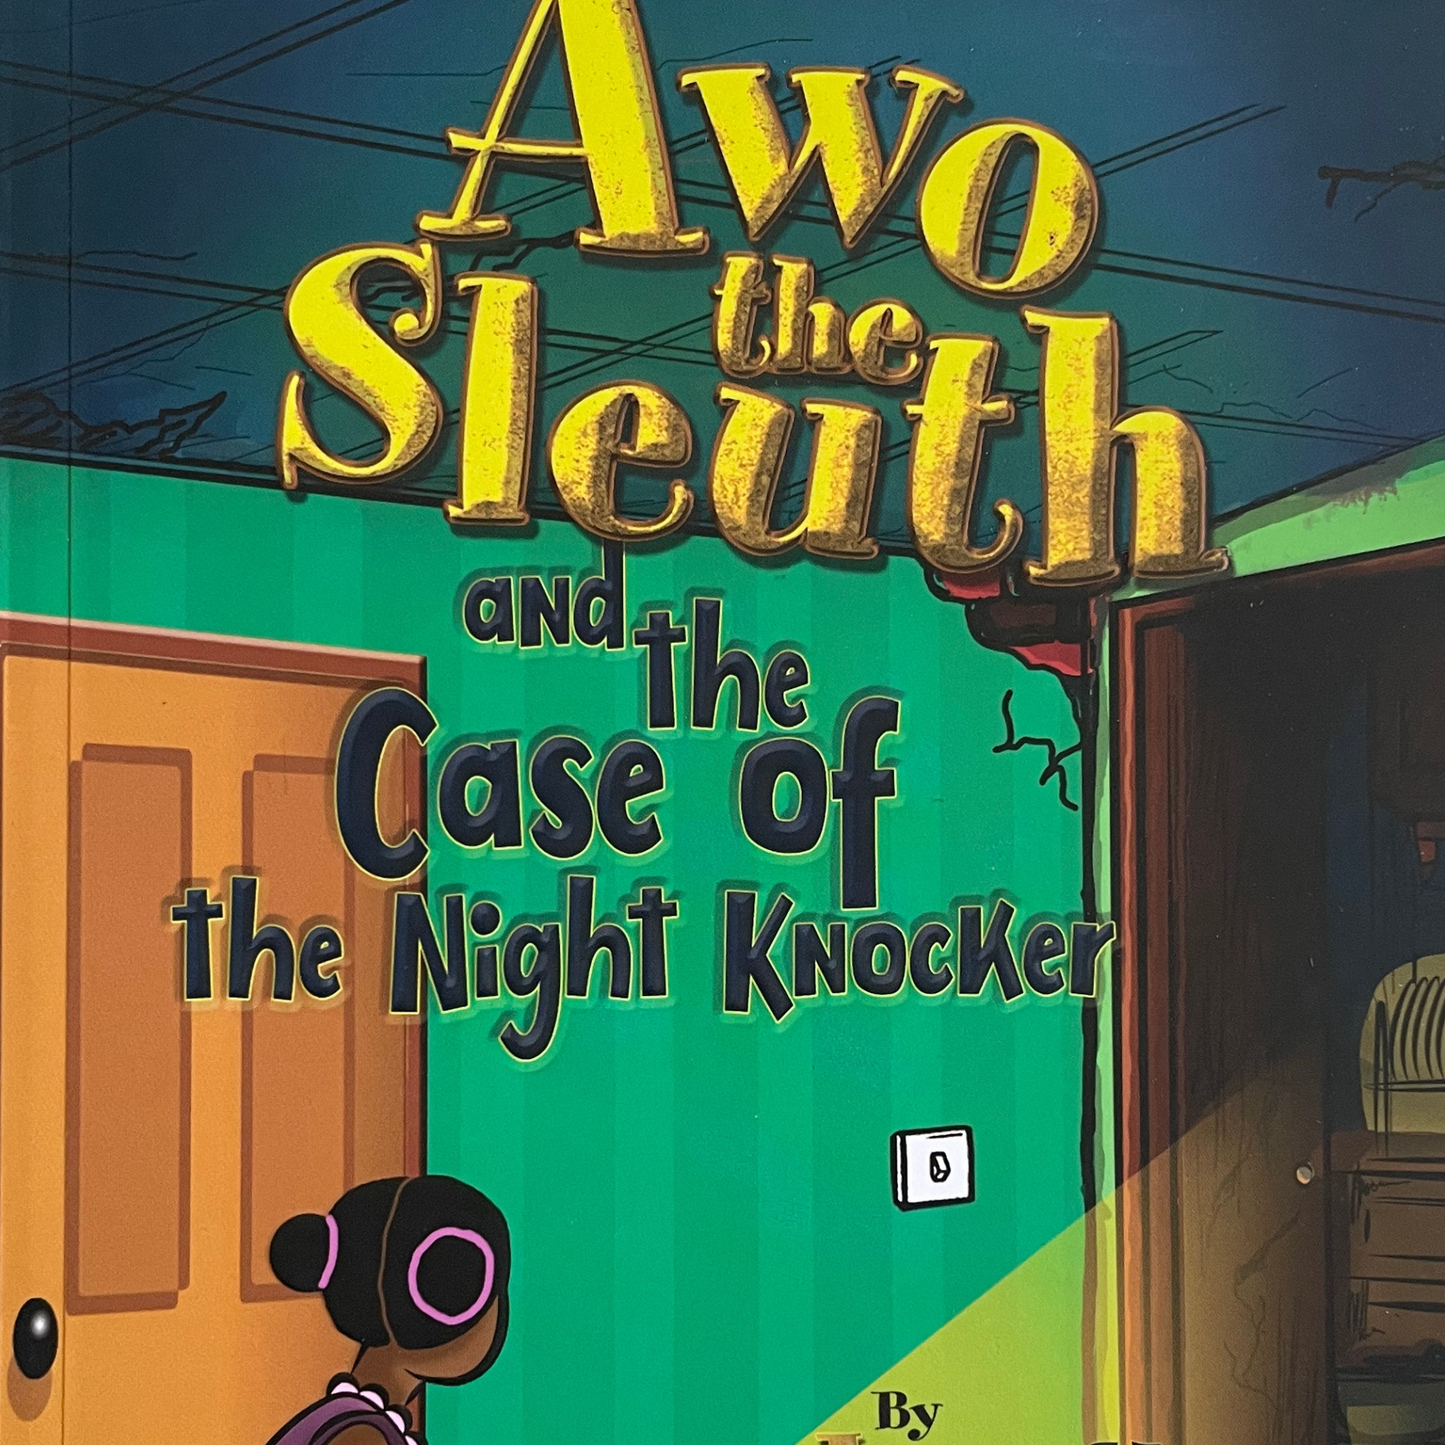 Awo the Sleuth and the Case of the Night Knocker